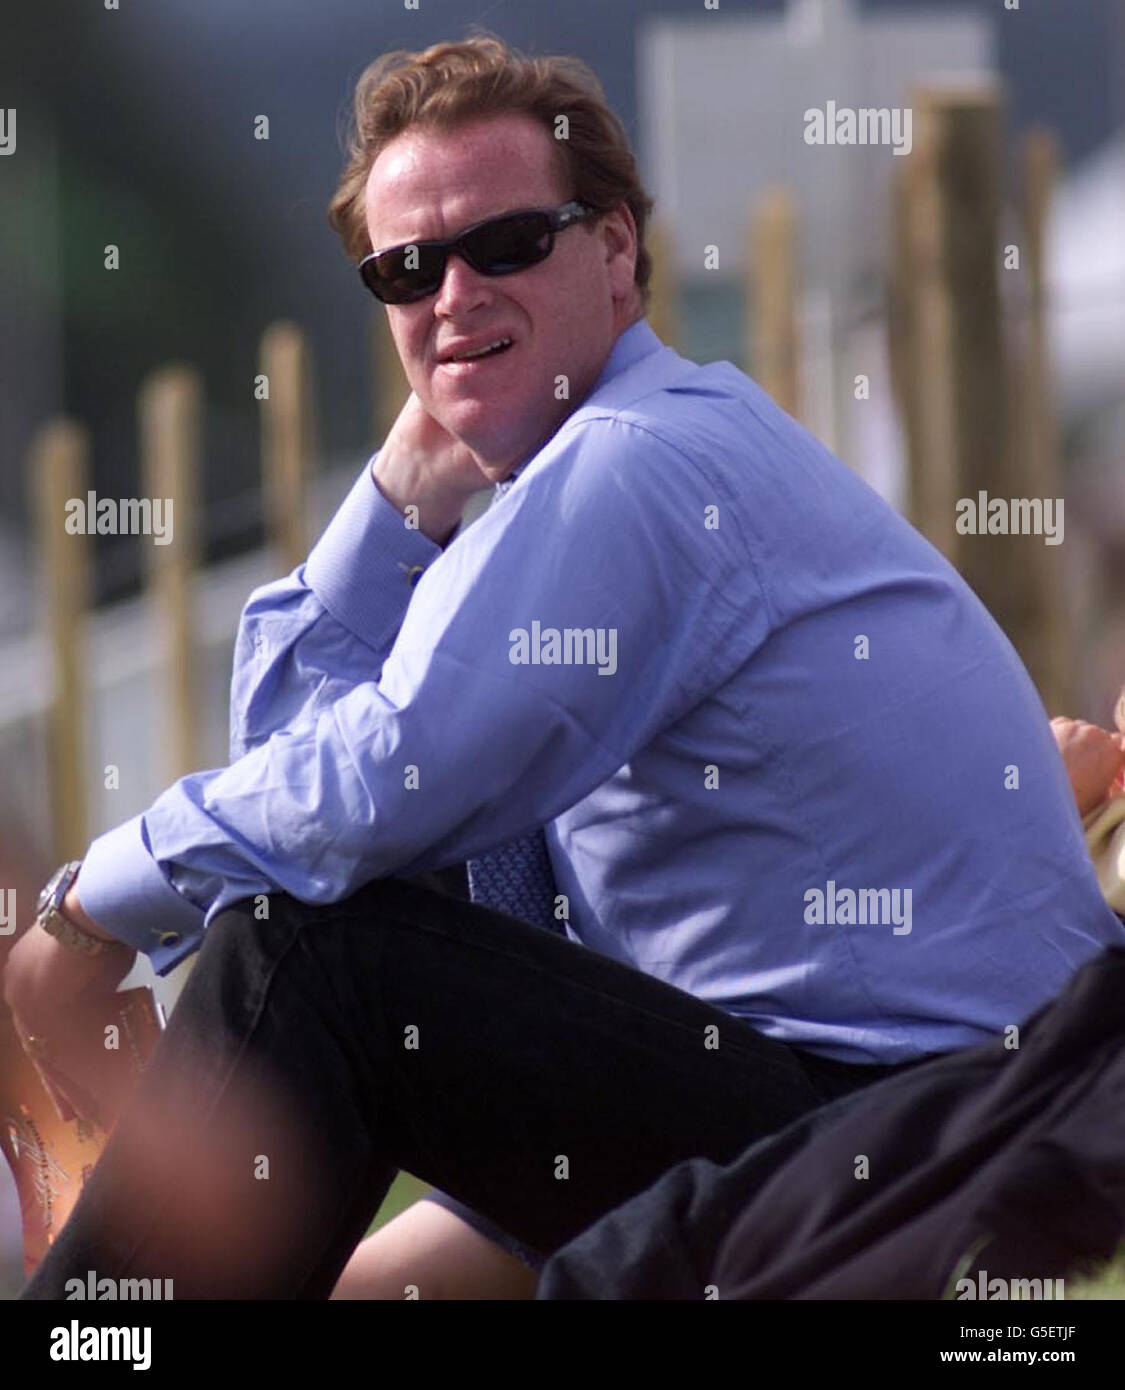 James Hewitt watches the final of the Veuve Clicquot Gold Cup polo competition at Cowdrey Park in Midhurst, West Sussex. Stock Photo